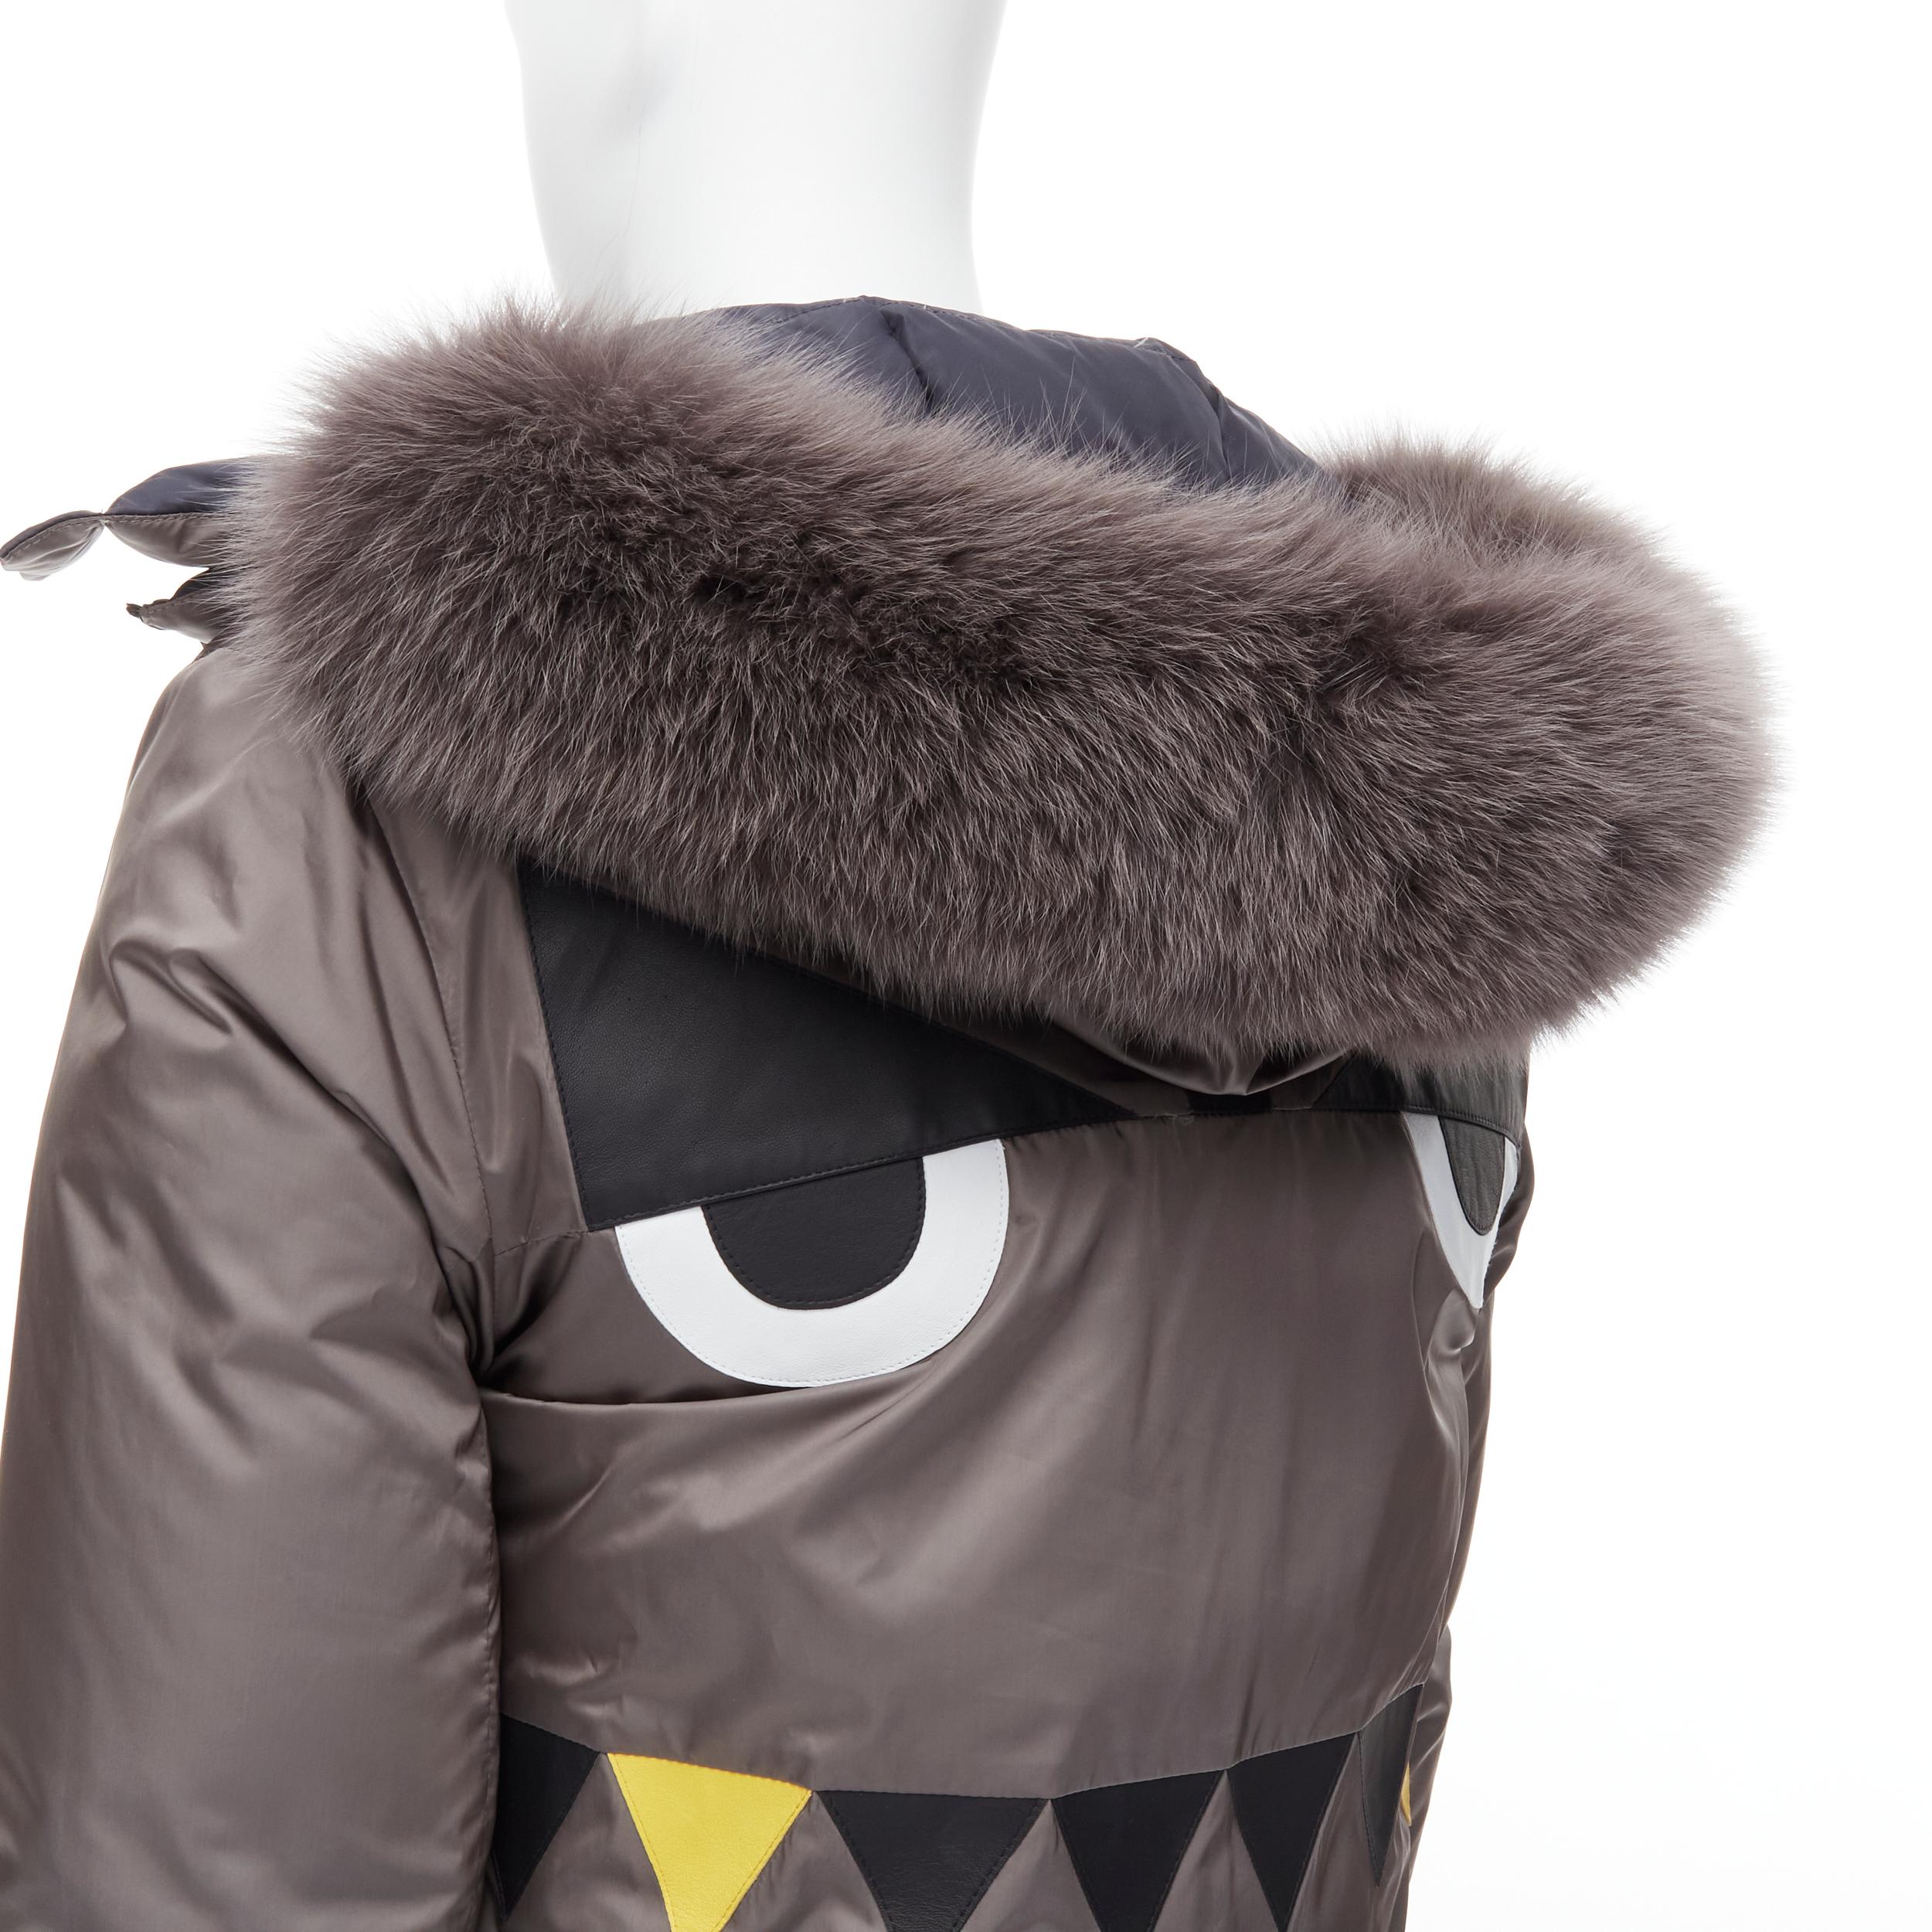 new FENDI Monster Bug grey black reversible fox fur hood down puffer XL EU52
Reference: TGAS/B01594 
Brand: Fendi 
Material: Nylon 
Color: Grey 
Pattern: Solid 
Closure: Zip 
Extra Detail: Fendi Monster Bug face patchwork at back. Reversible from